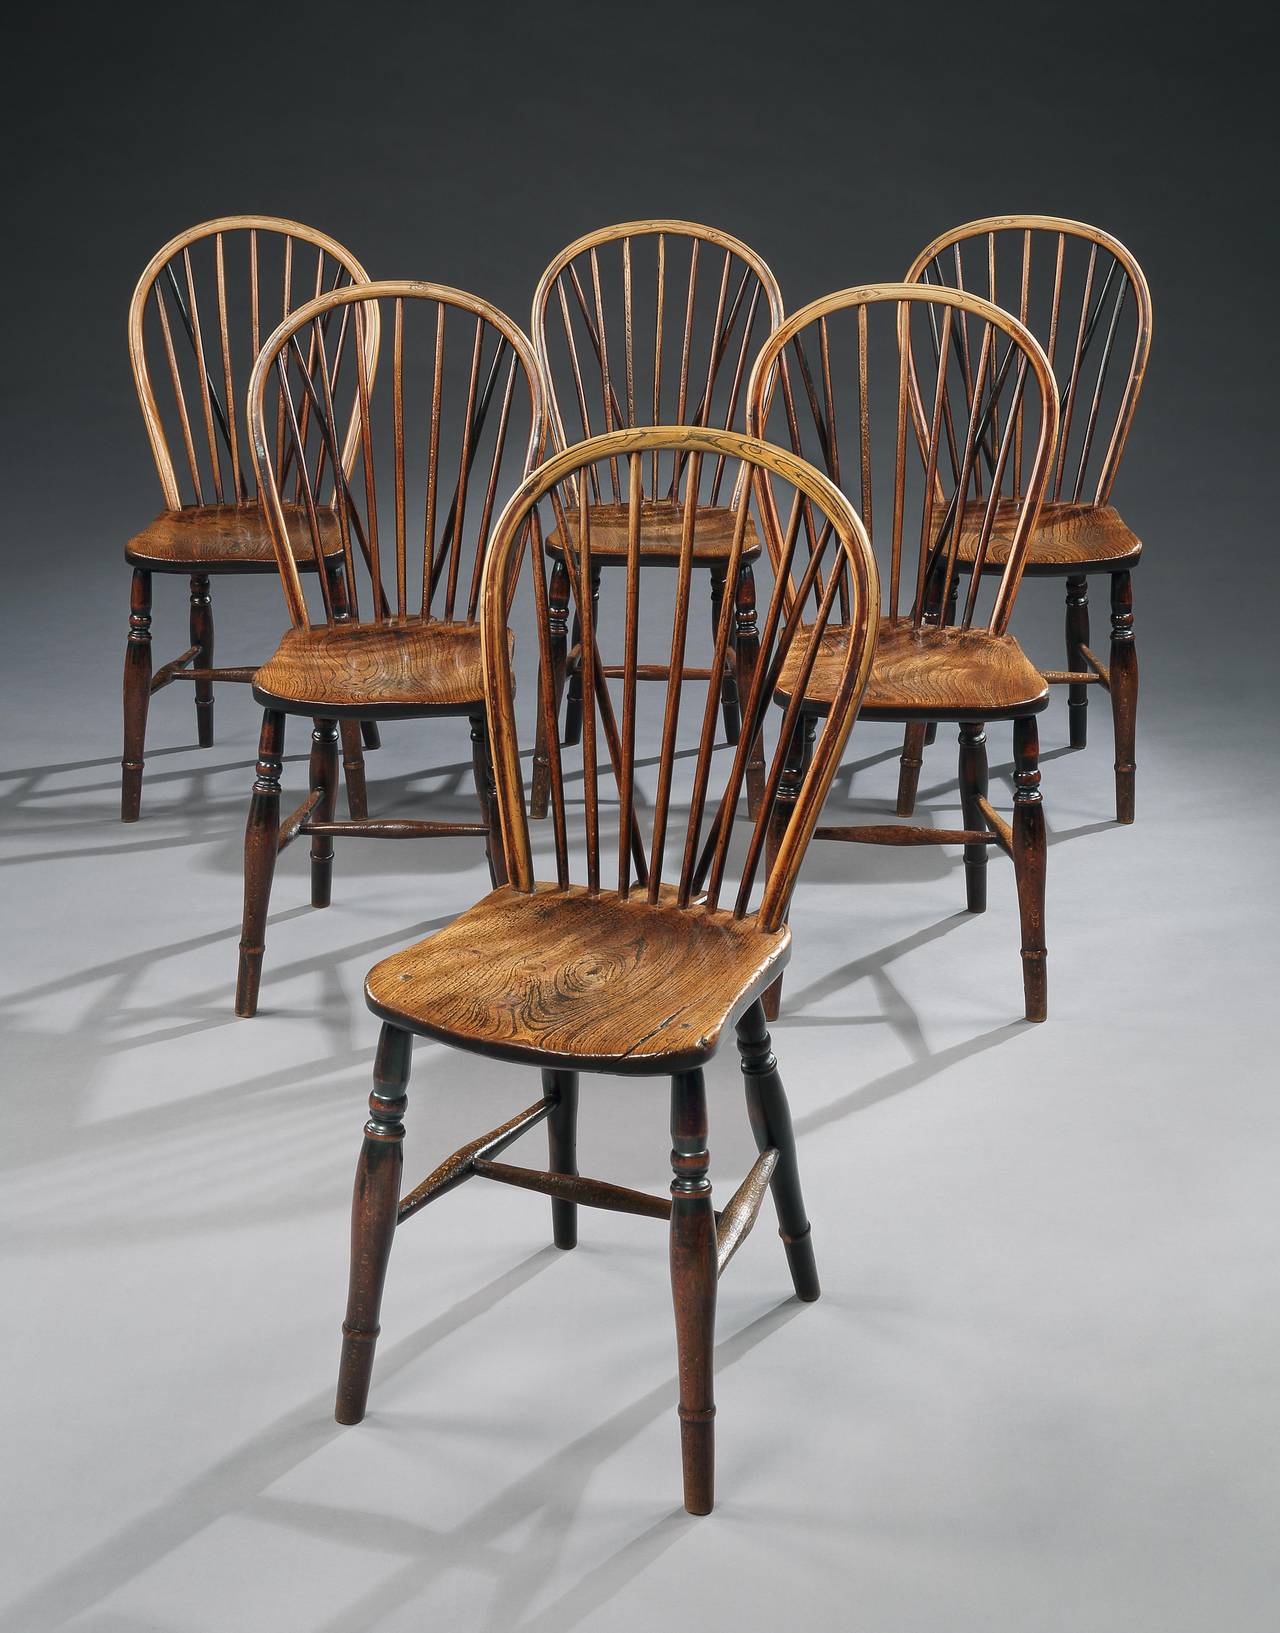 Of Classic bentwood and turned spindle form with saddled seats.
Nutty colored ash and elm.
English, Buckinghamshire, circa 1820.
Measures: 34.75” high x 17” wide x 14.5” deep.
Seat height: 16.5